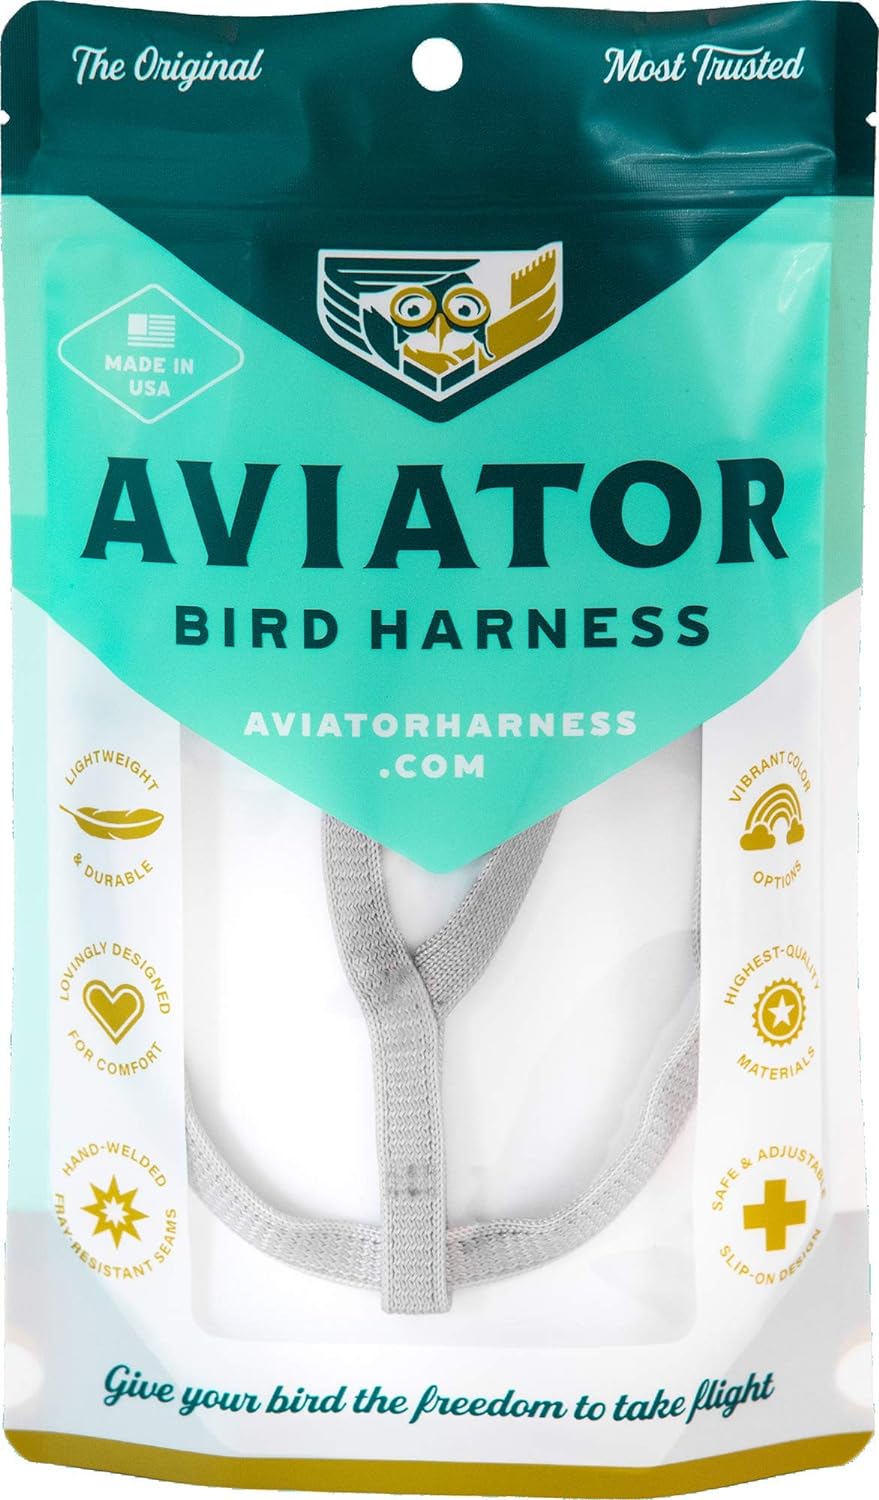 The AVIATOR Pet Bird Harness and Leash: Large Silver Made in America